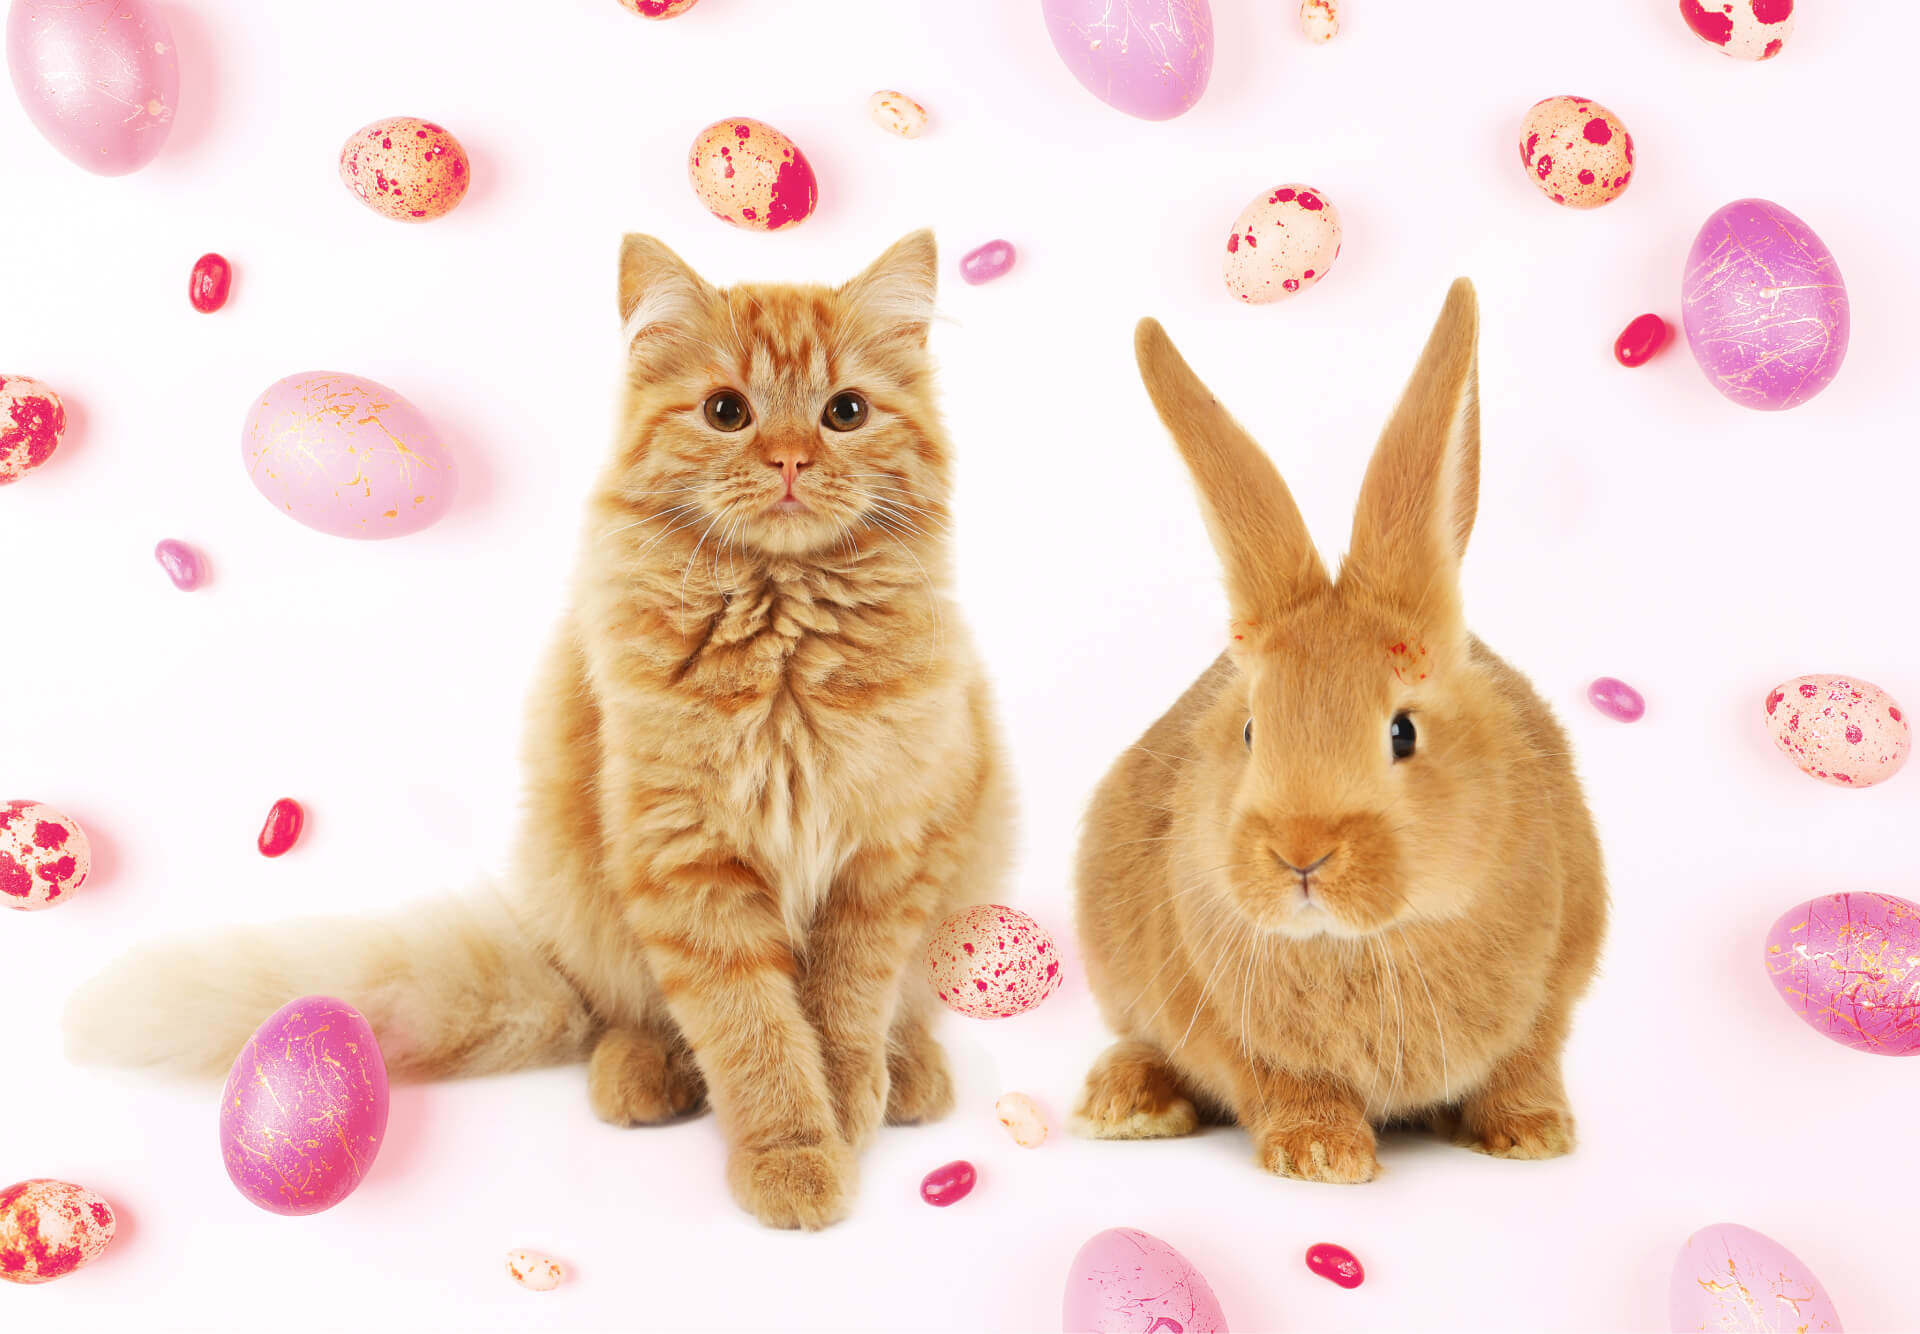 How To Celebrate Easter With Your Cat?